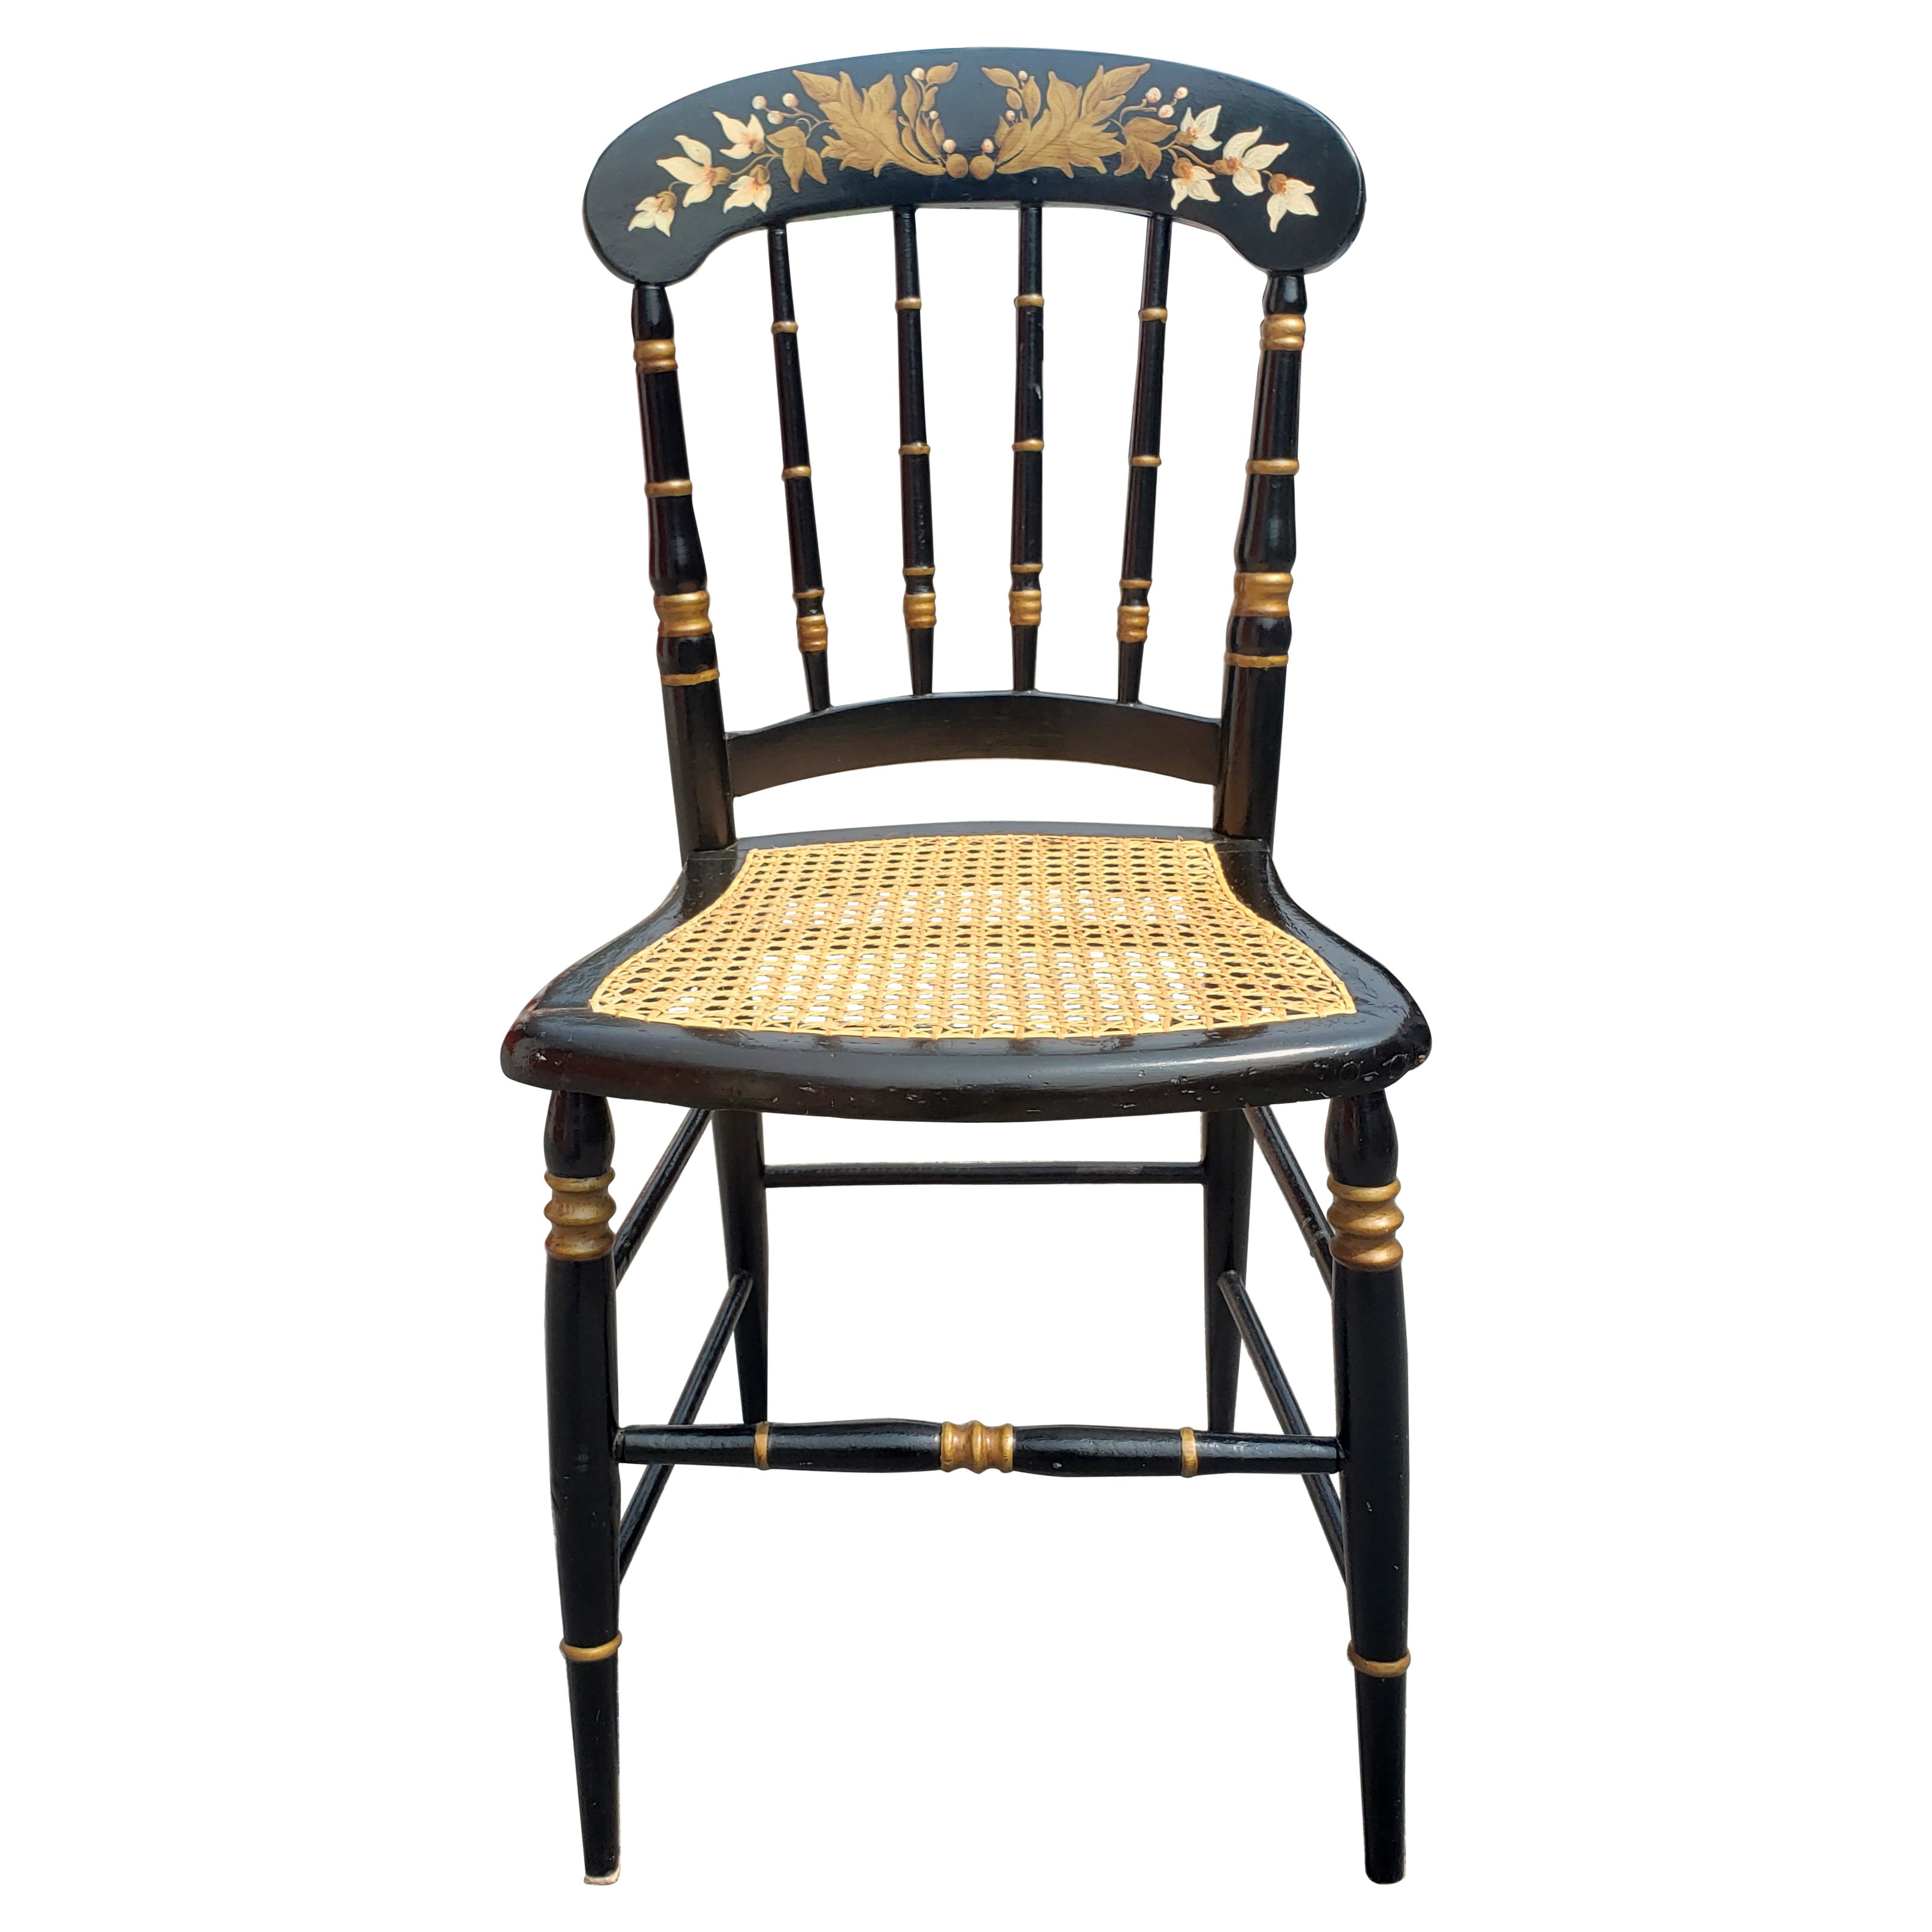 Late 19th Century Ebonized and Parcel Gilt Decorated Cane Seat Side Chair